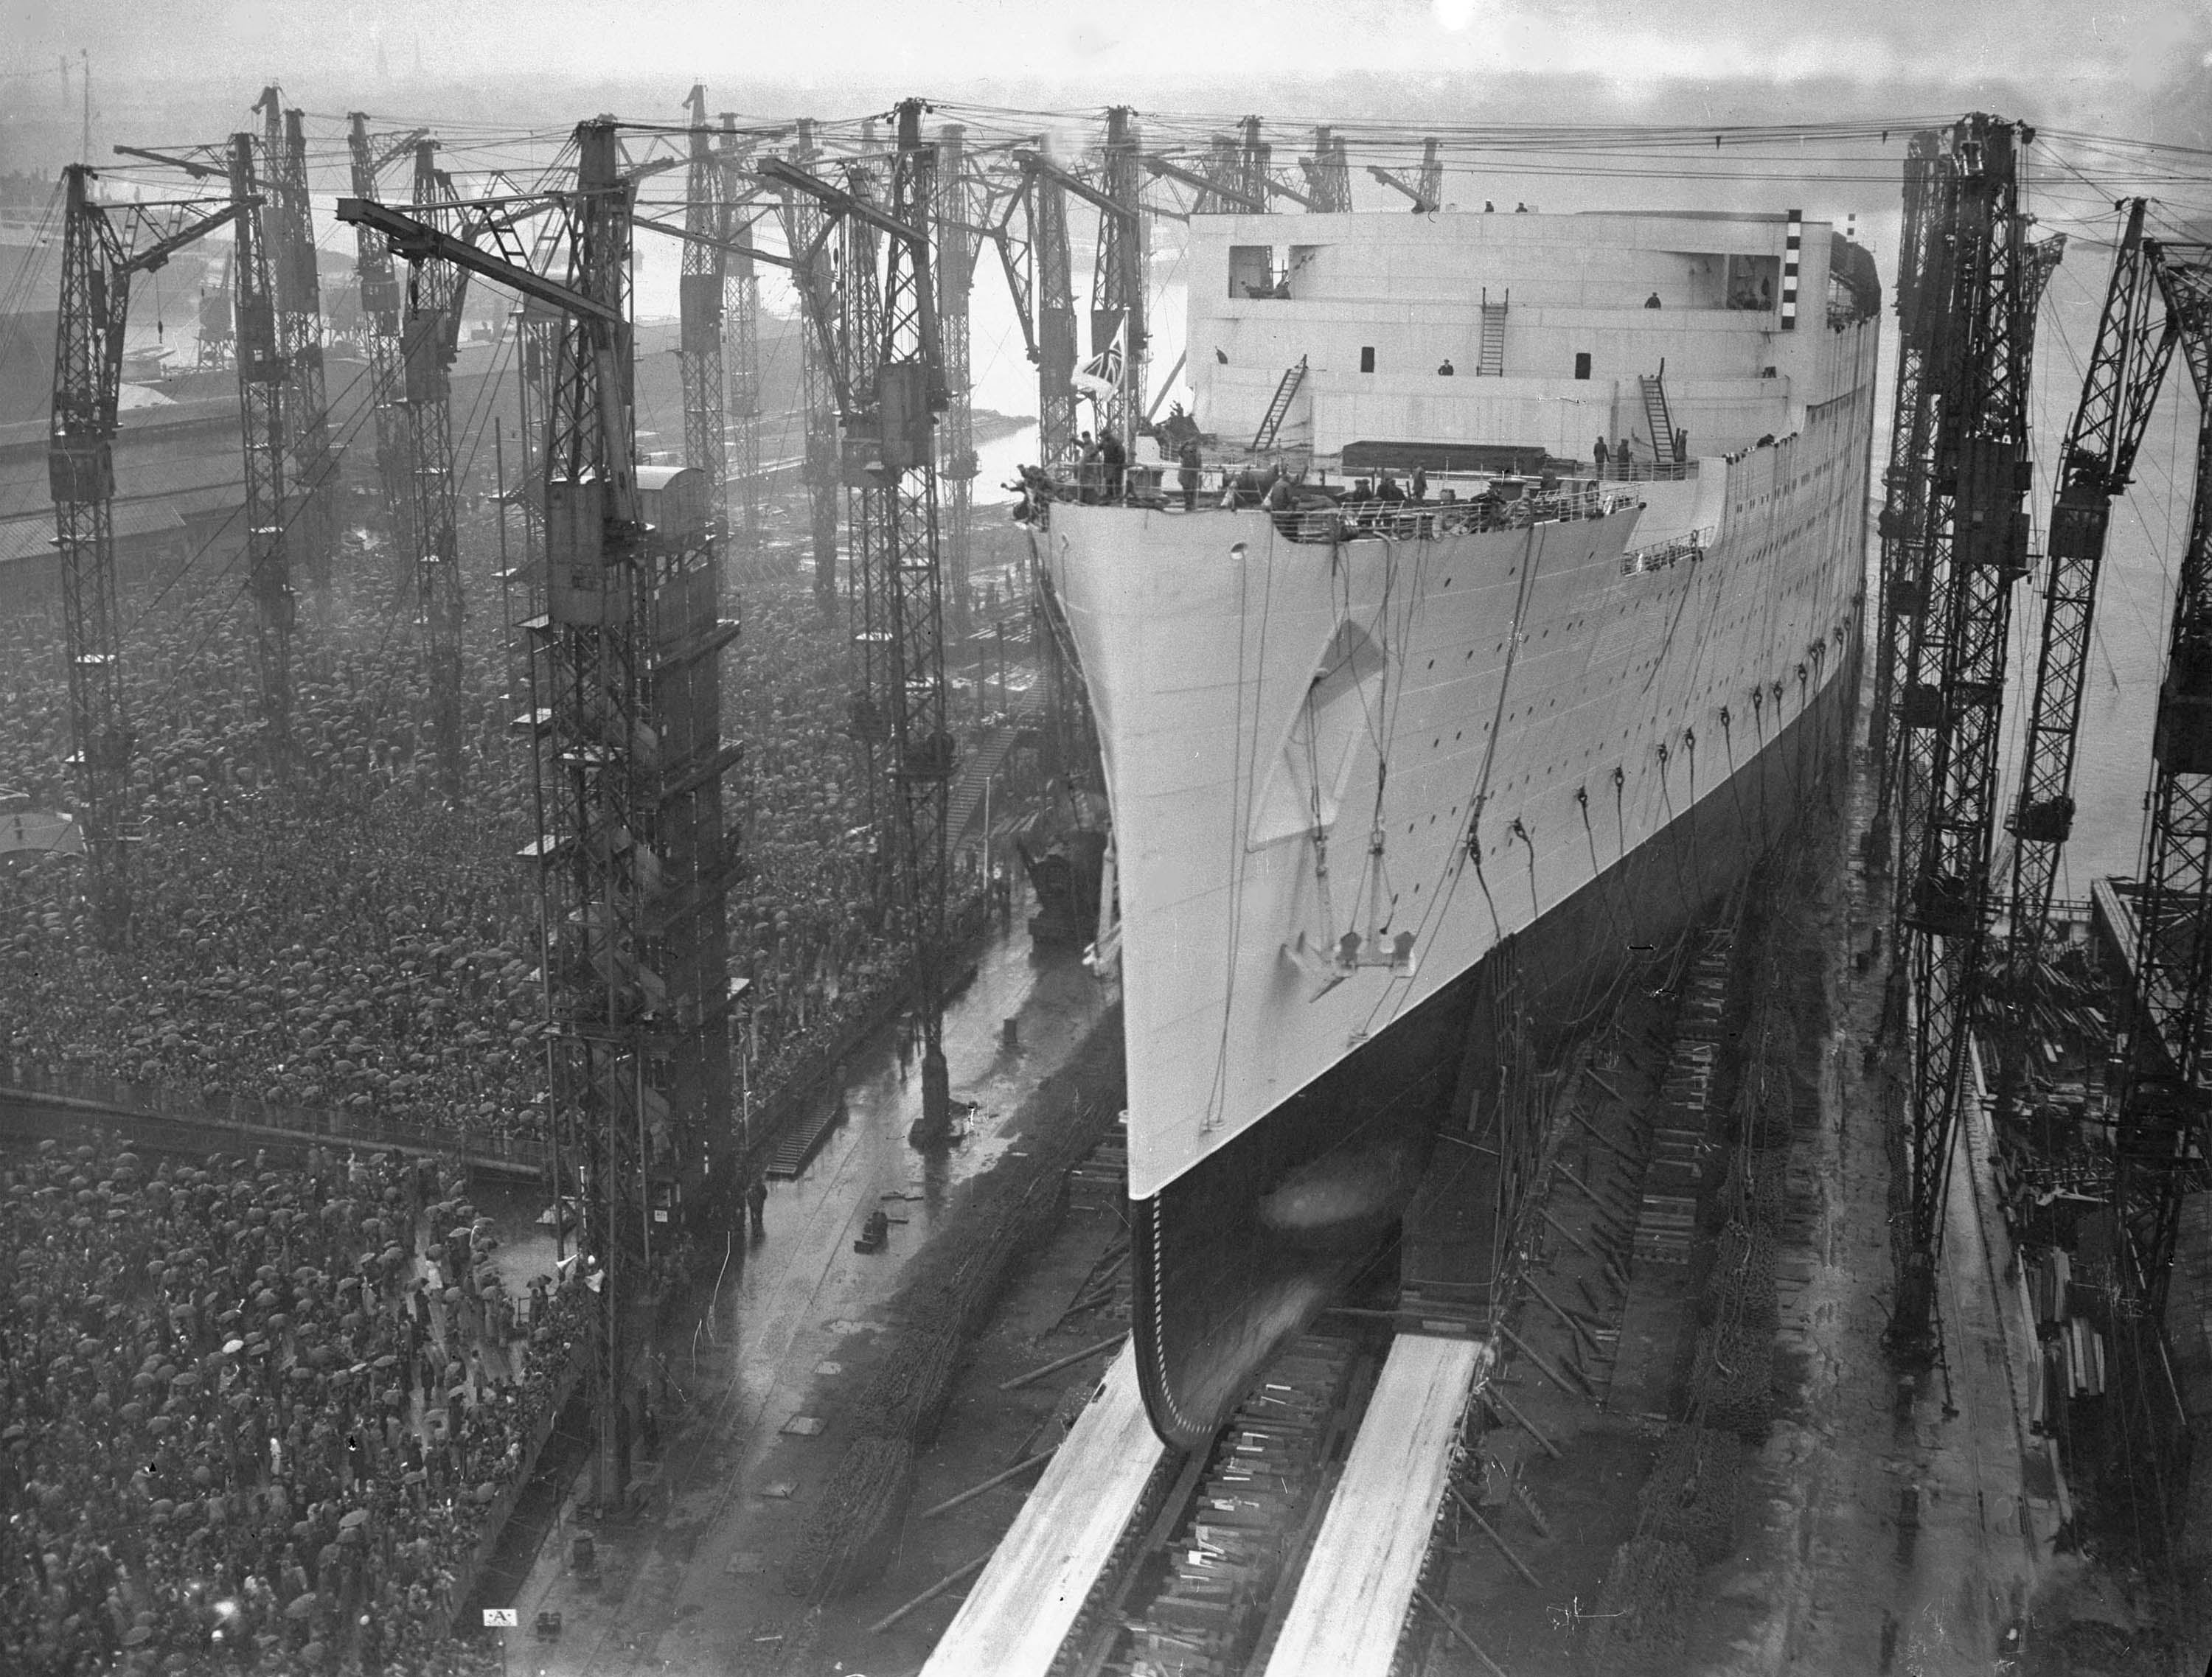 New Cunard liner, the Queen Mary, slides down the slipway during her launch at the John Brown Shipyard, Clydebank, Scotland, Sept. 26, 1934. The liner was launched by Her Majesty Queen Mary and was previously known just as Cunarder 534. (AP Photo/Sid Beadel)